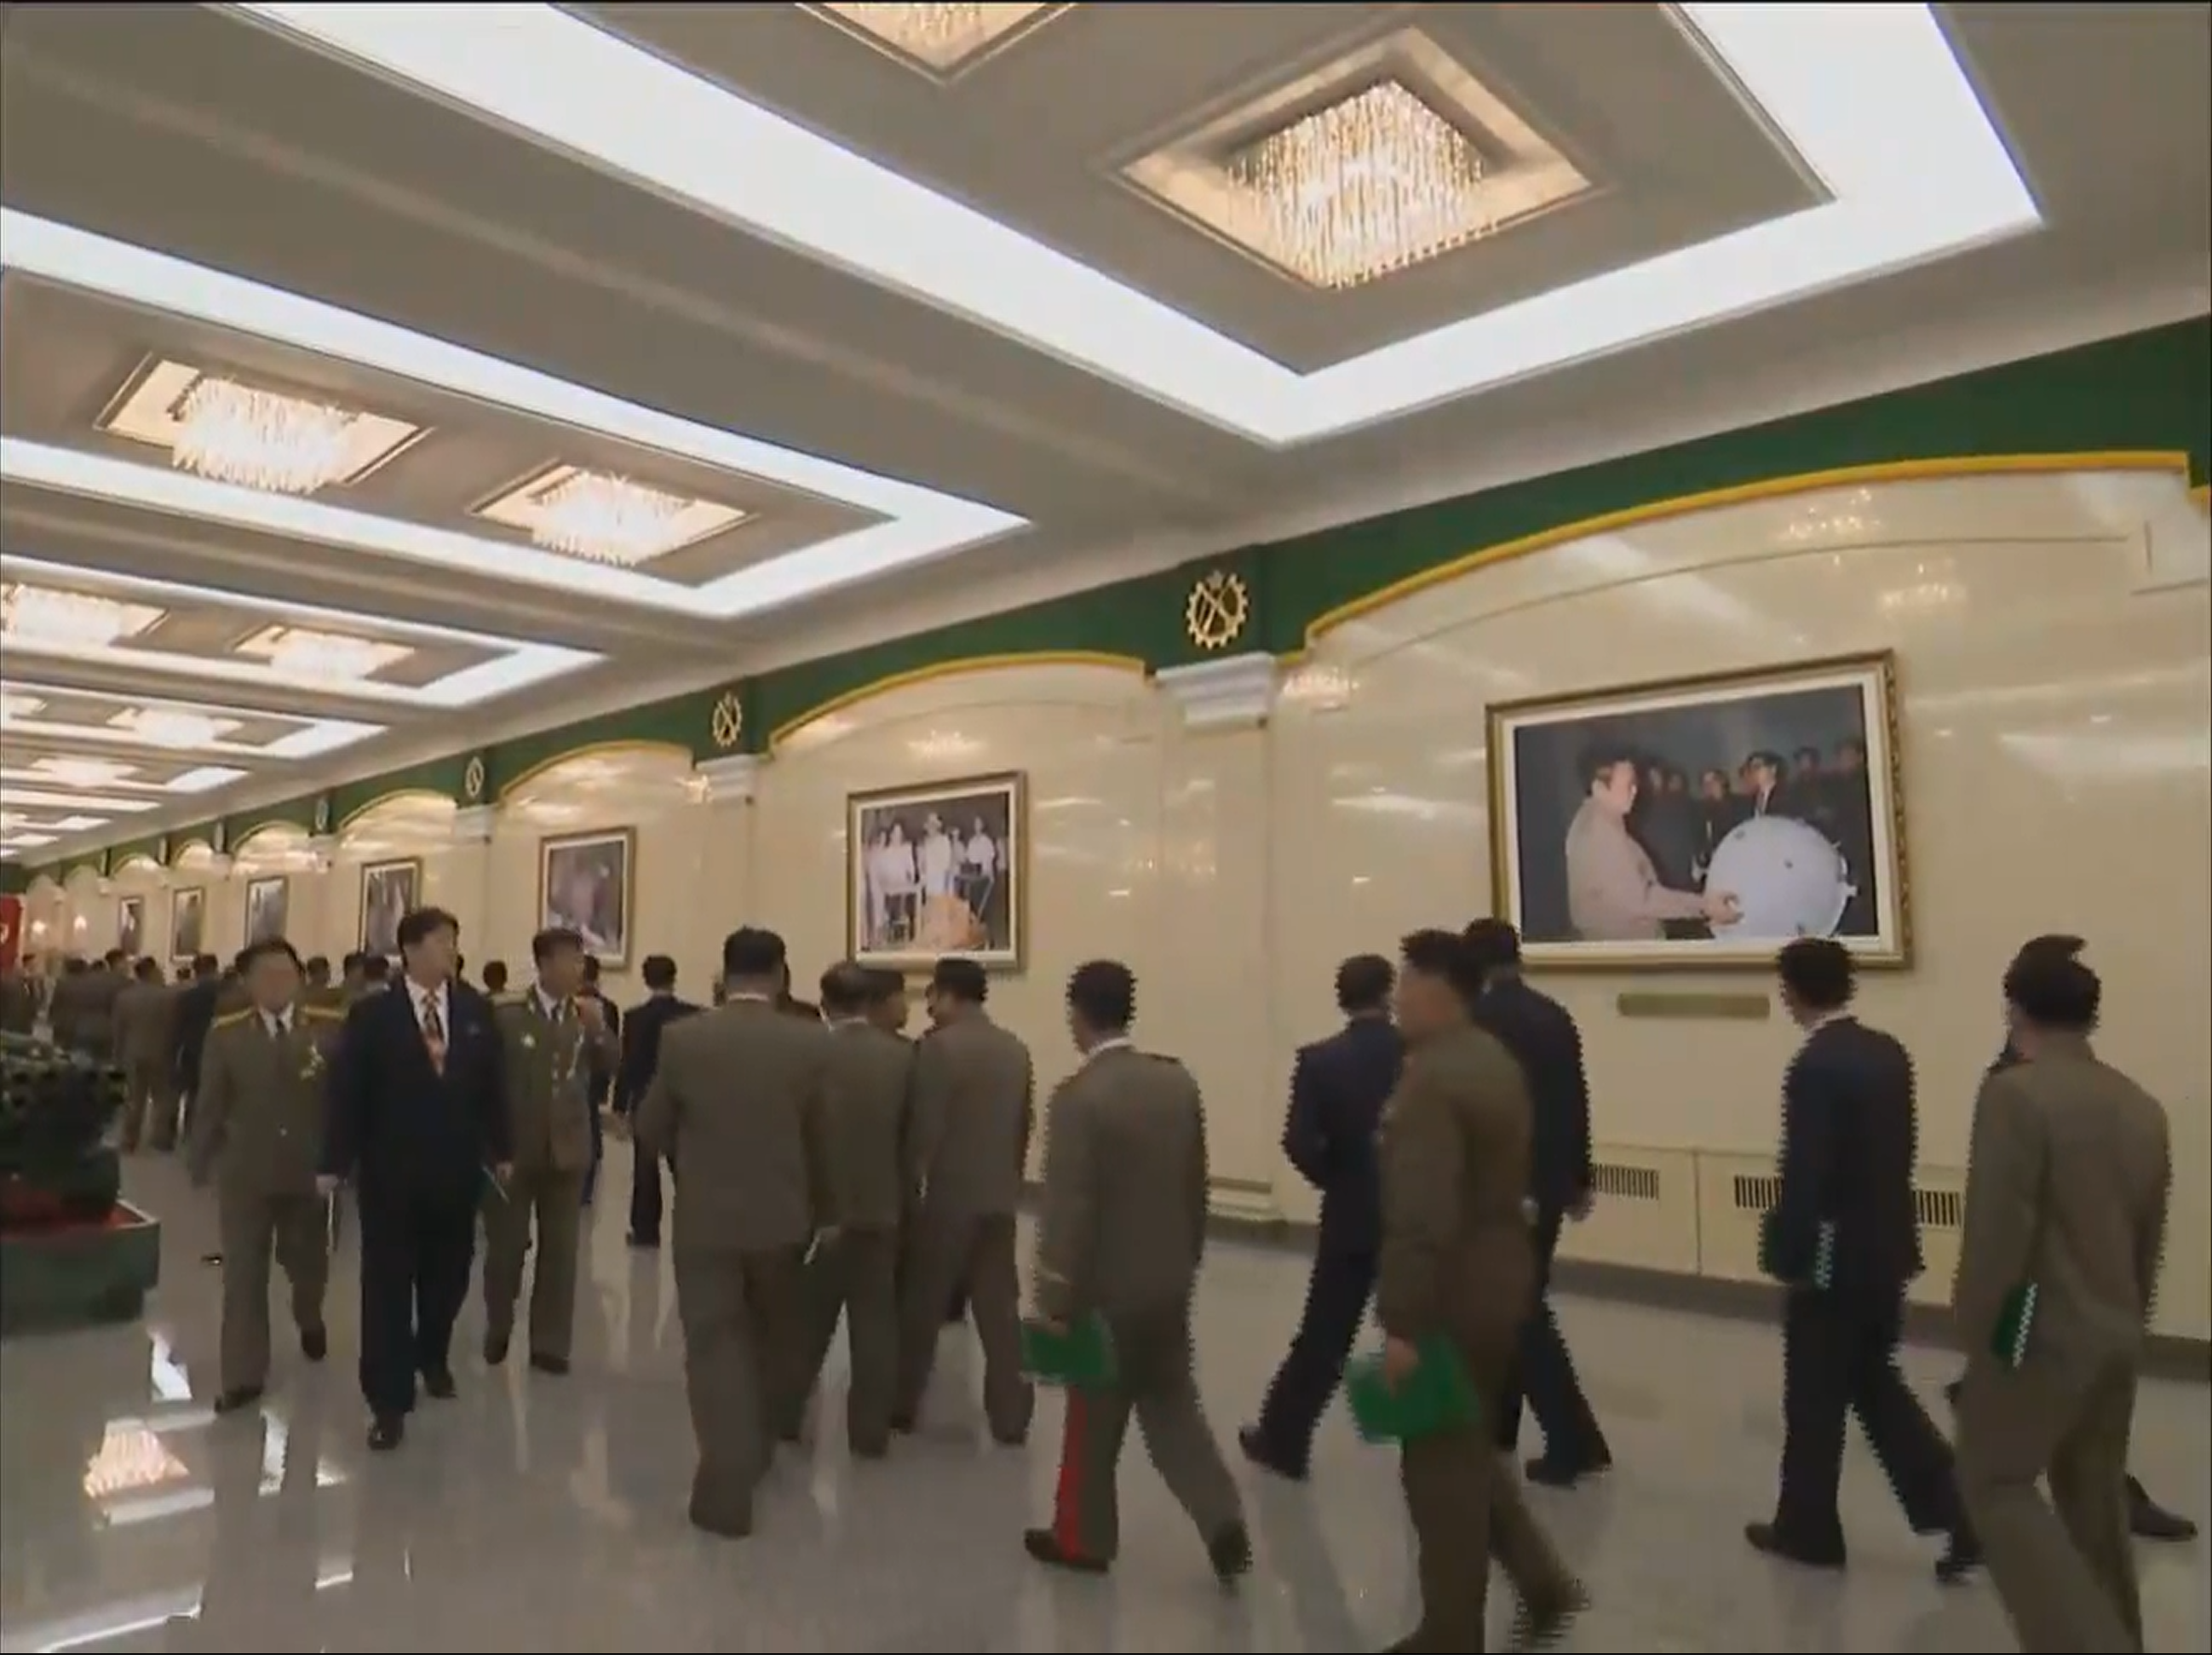 Figure 1. Kim Jong Il inspecting a spherical item, shown during a December 2017 meeting celebrating the State’s development of nuclear armed forces. Image: KCTV